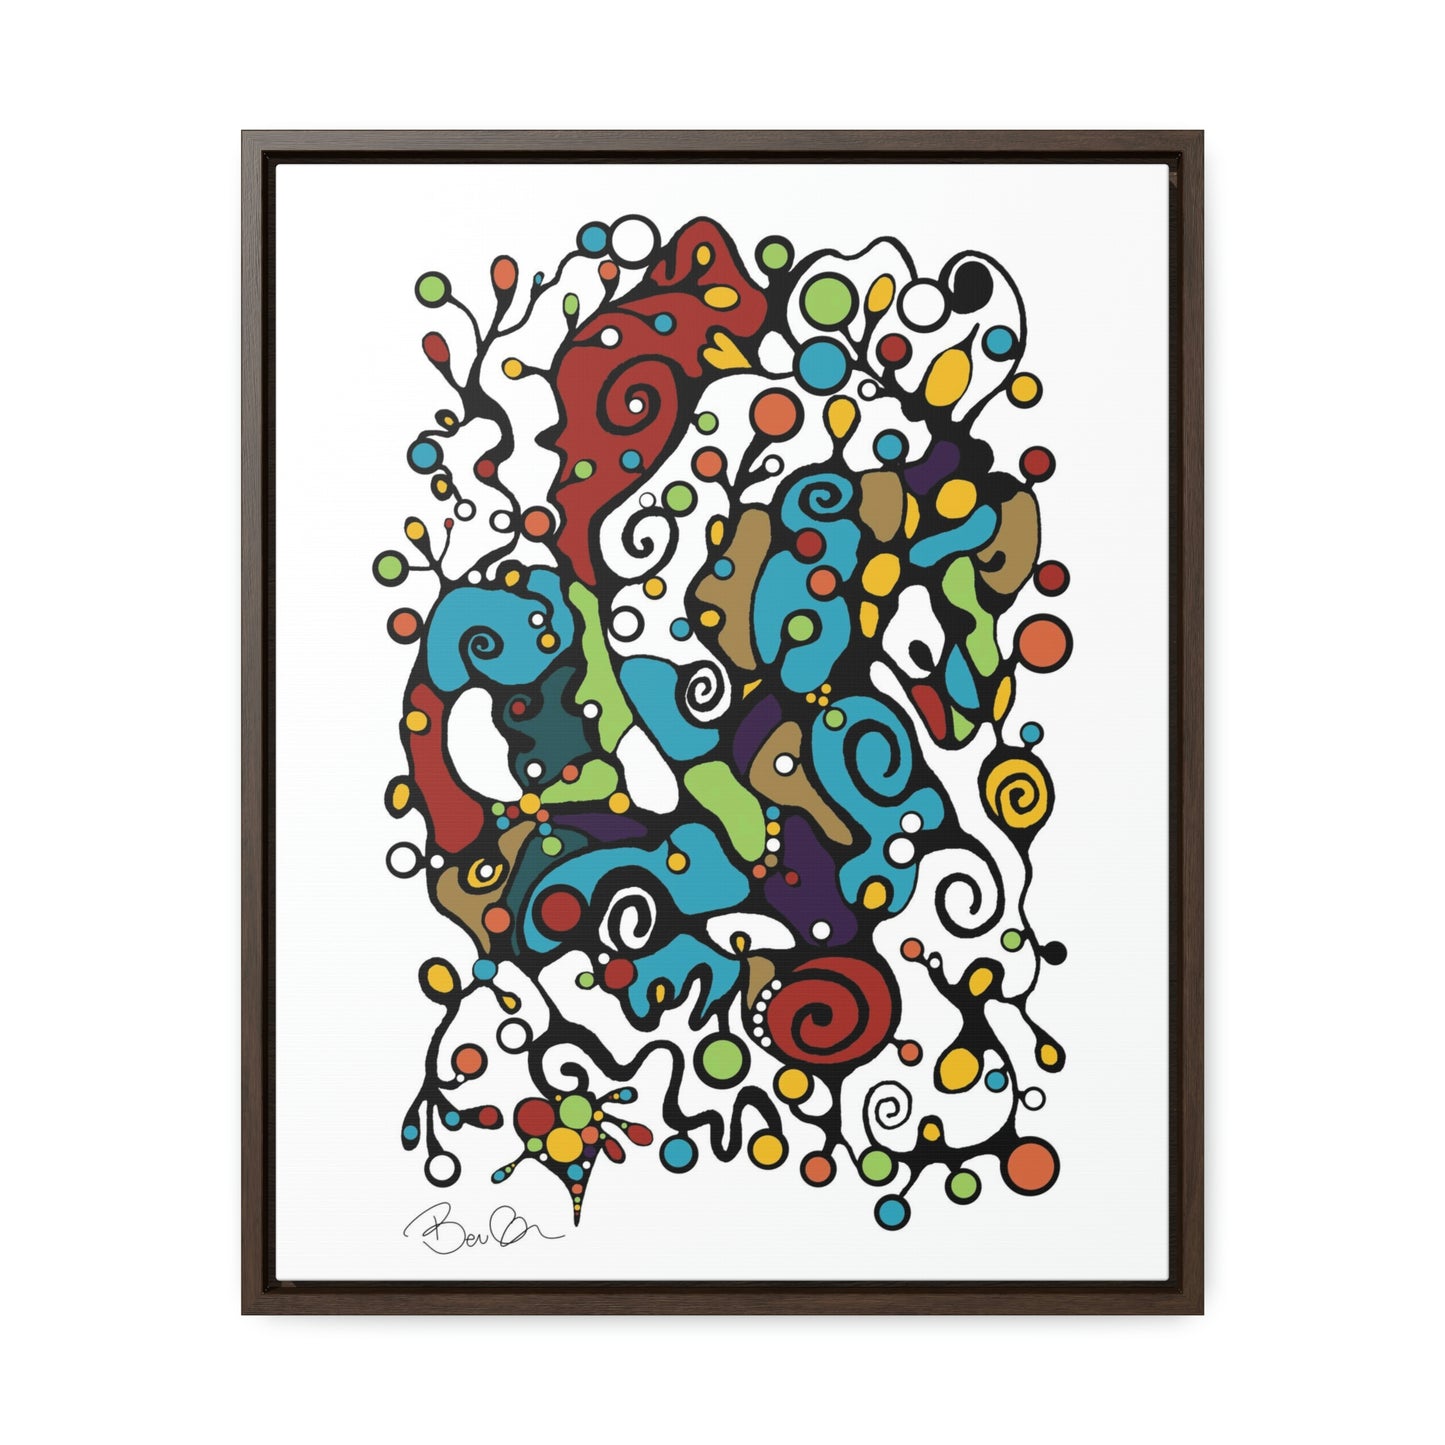 Gallery Canvas Wraps - "Unraveling Hearts:" - Framed Doodle Painting with Hidden Heart